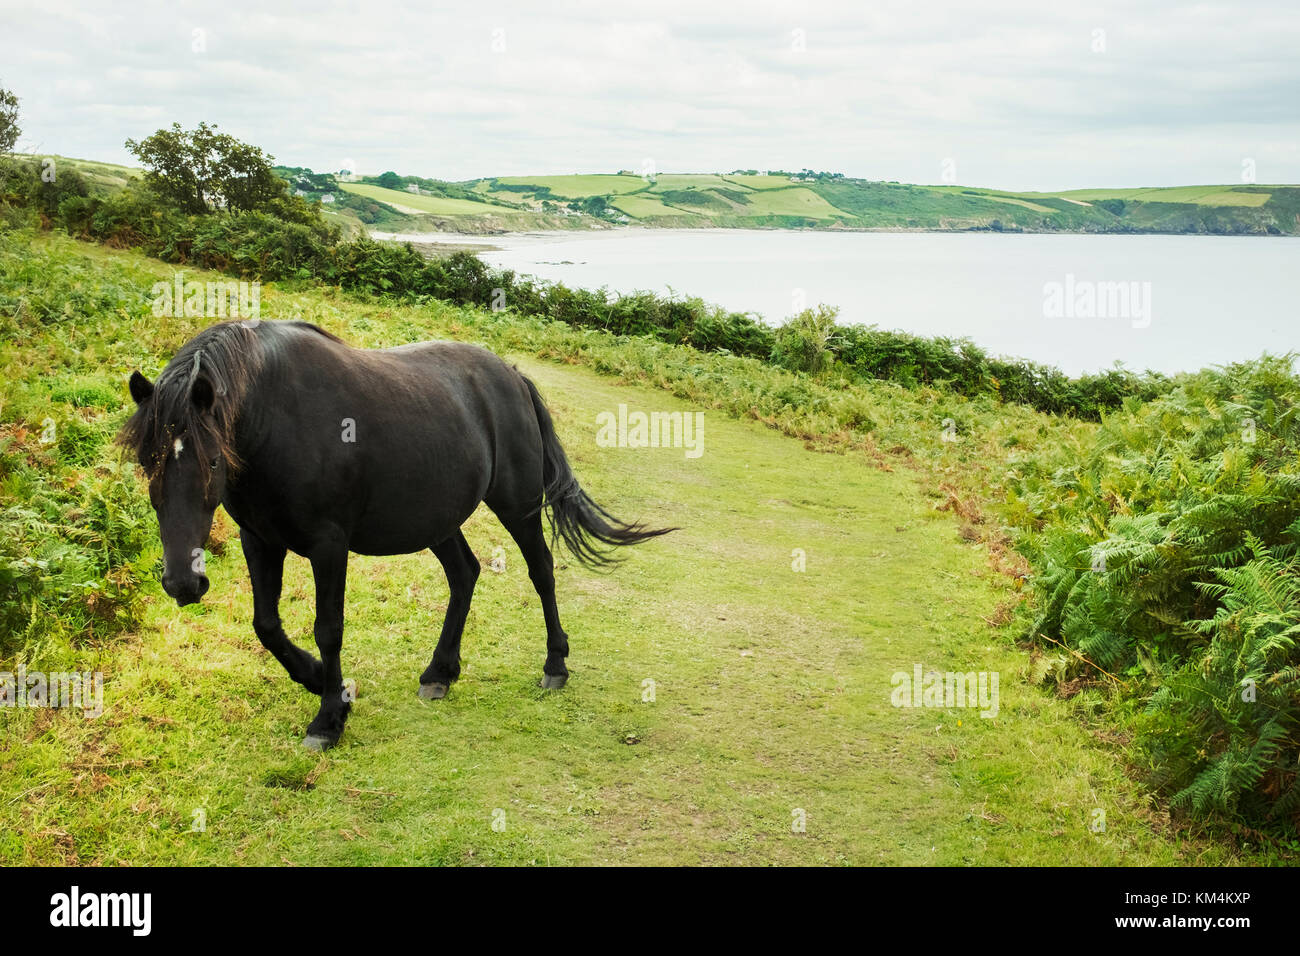 A wild pony with long mane and tail pony on a hillside path on the coast. Stock Photo